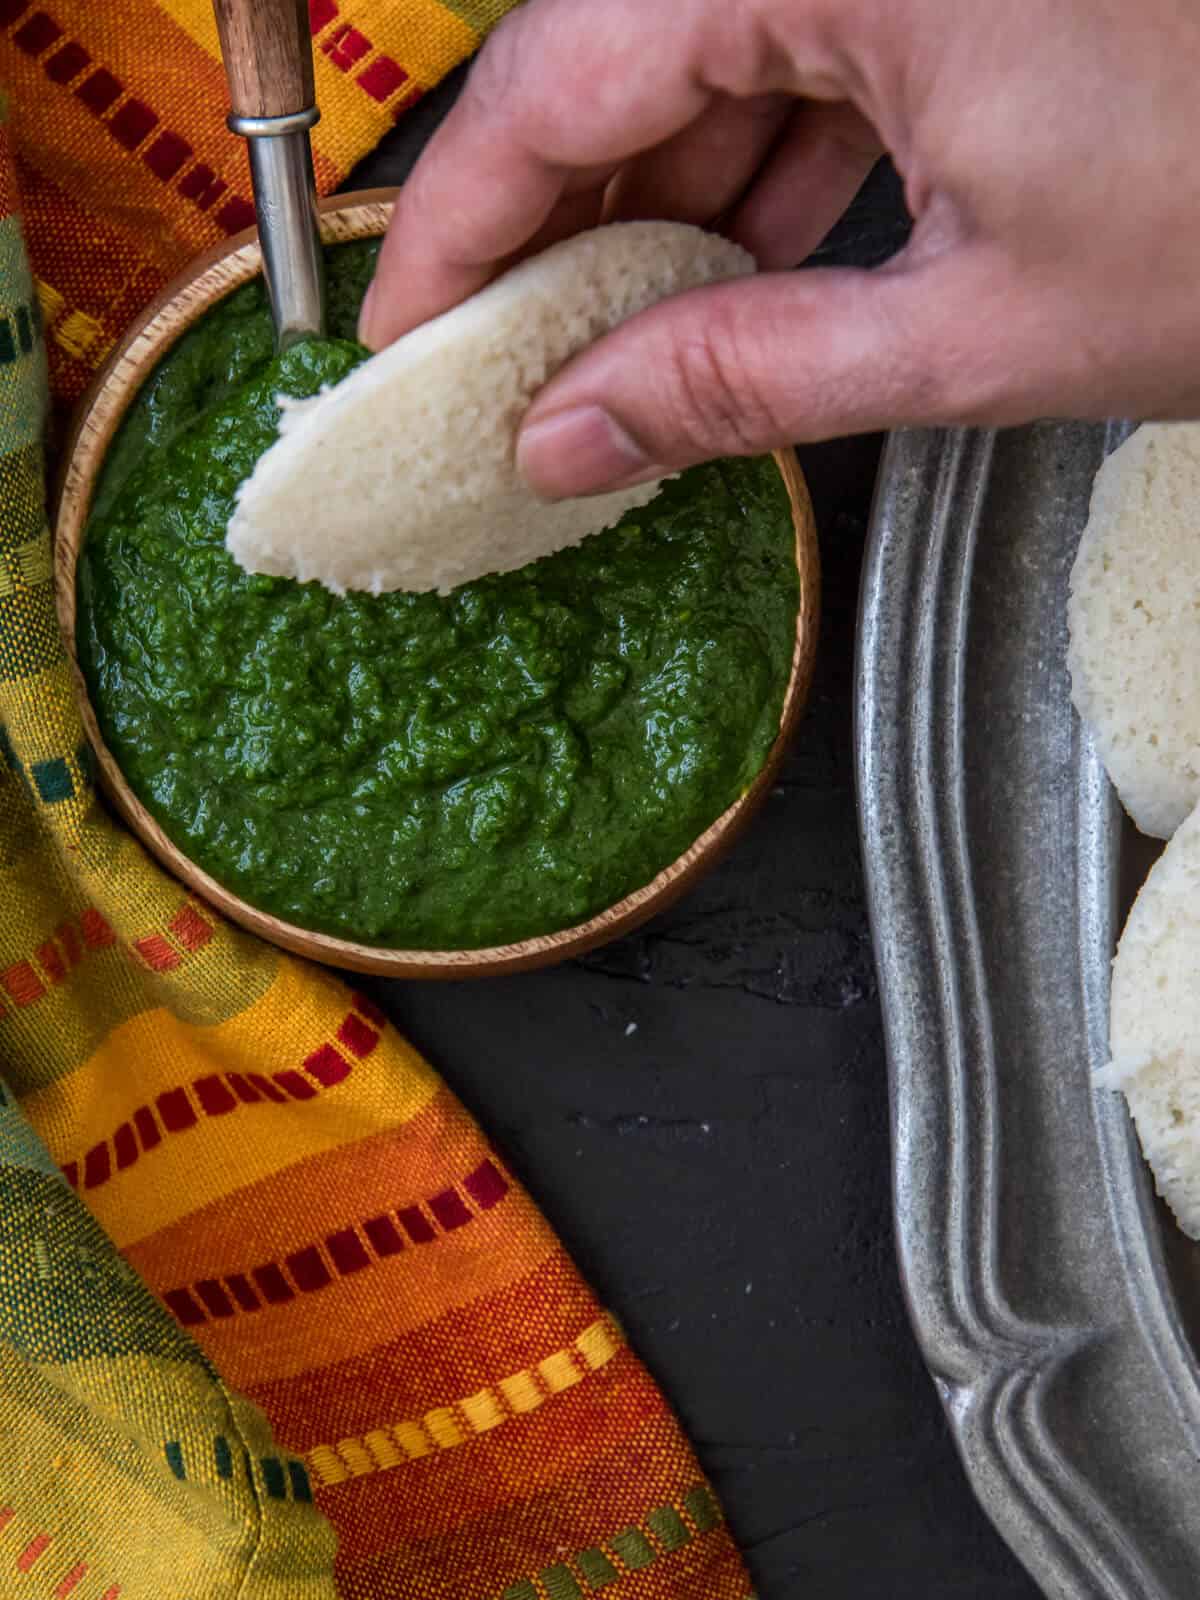 Idli is being dipped in cilantro mint chutney served in a wooden bowl.